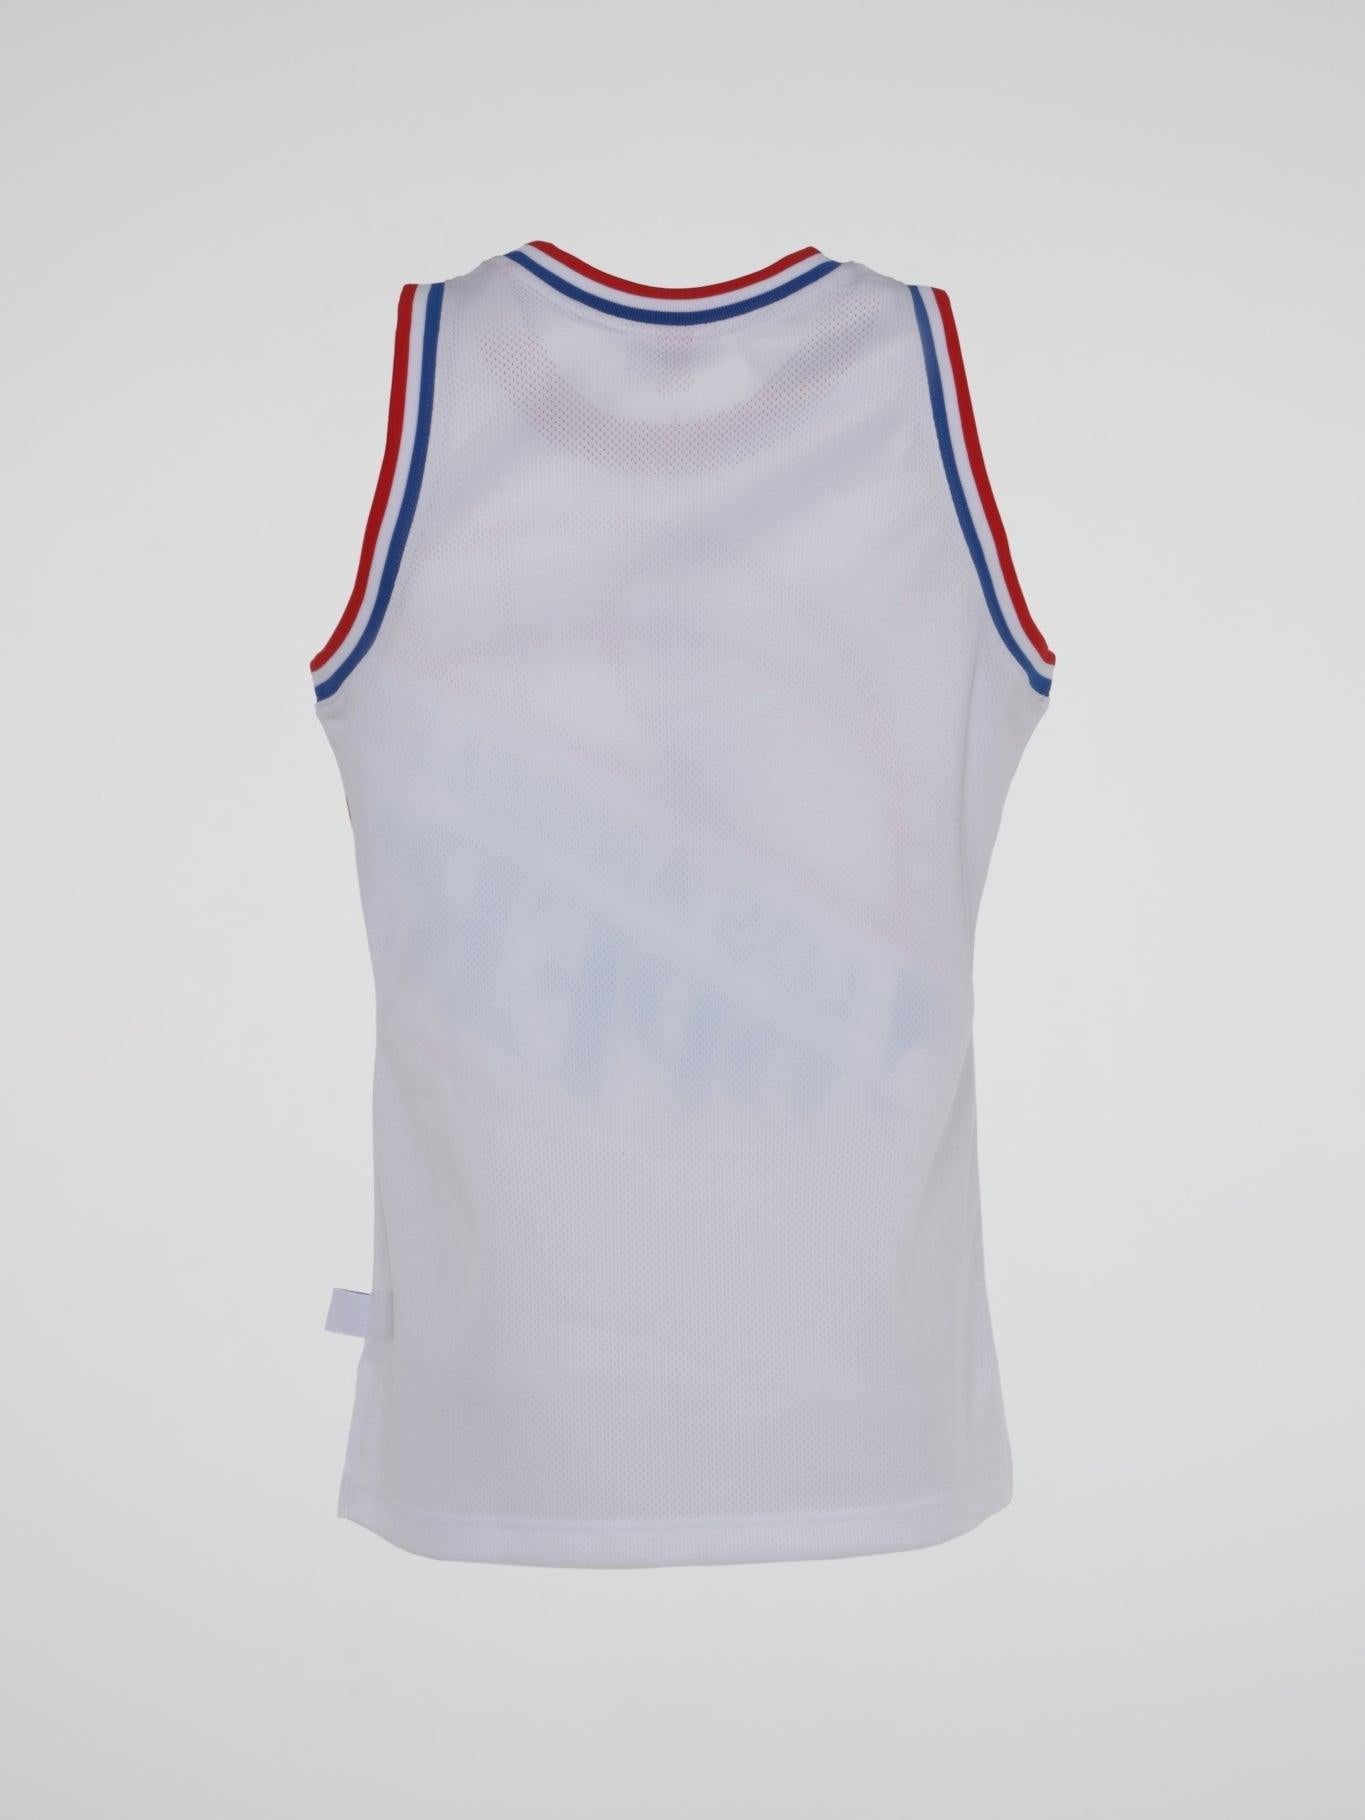 Los Angeles Clippers Blown Out Fashion Jersey - B-Hype Society